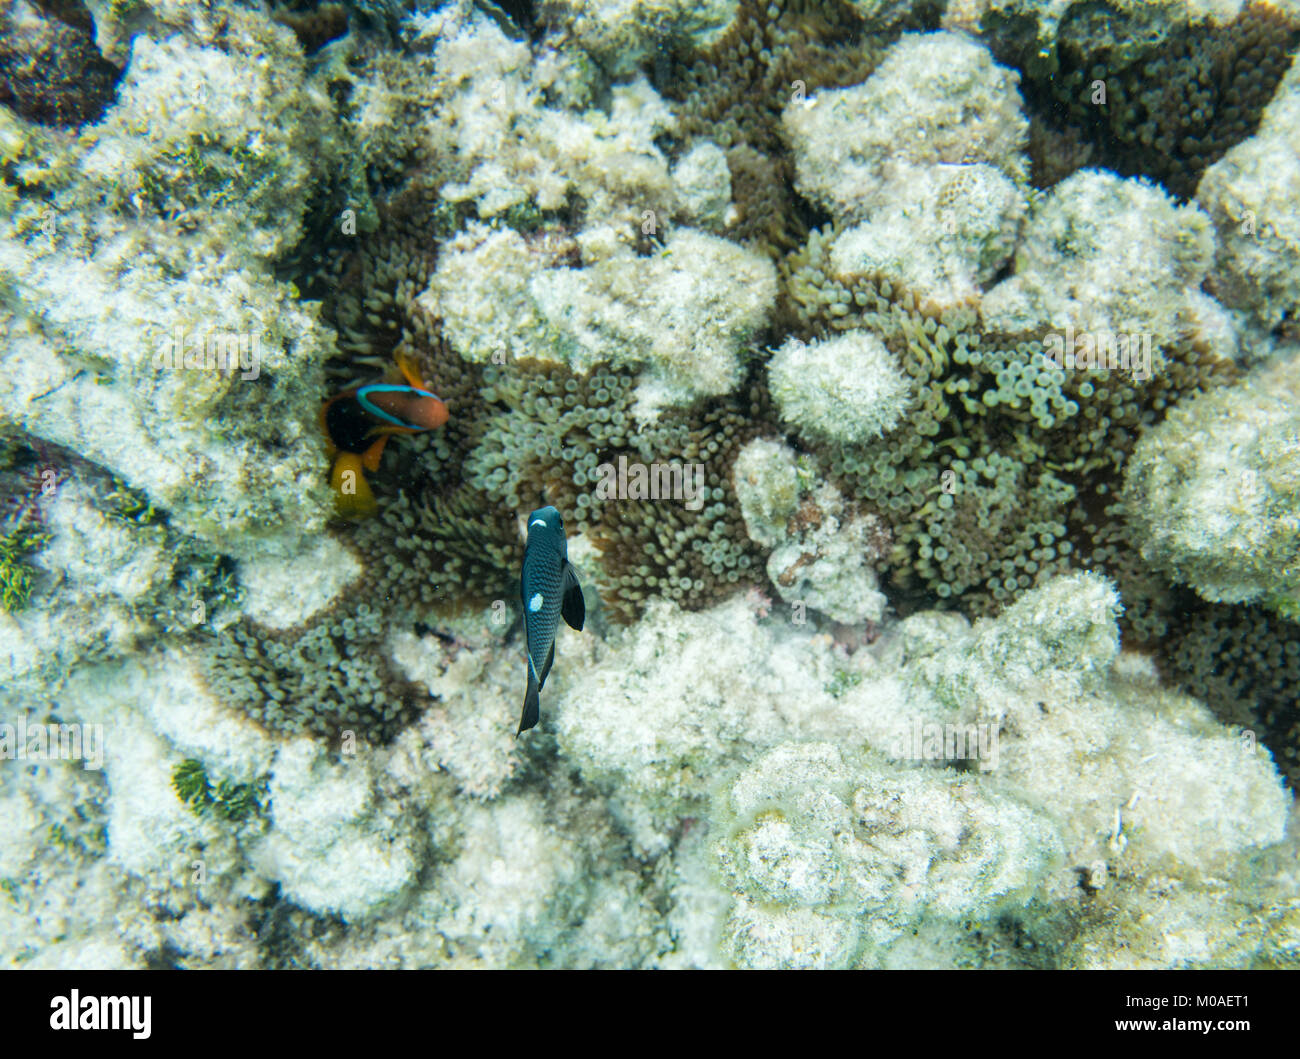 Clown fish and domino damsel in the stunning coral reef ecosystem off ...